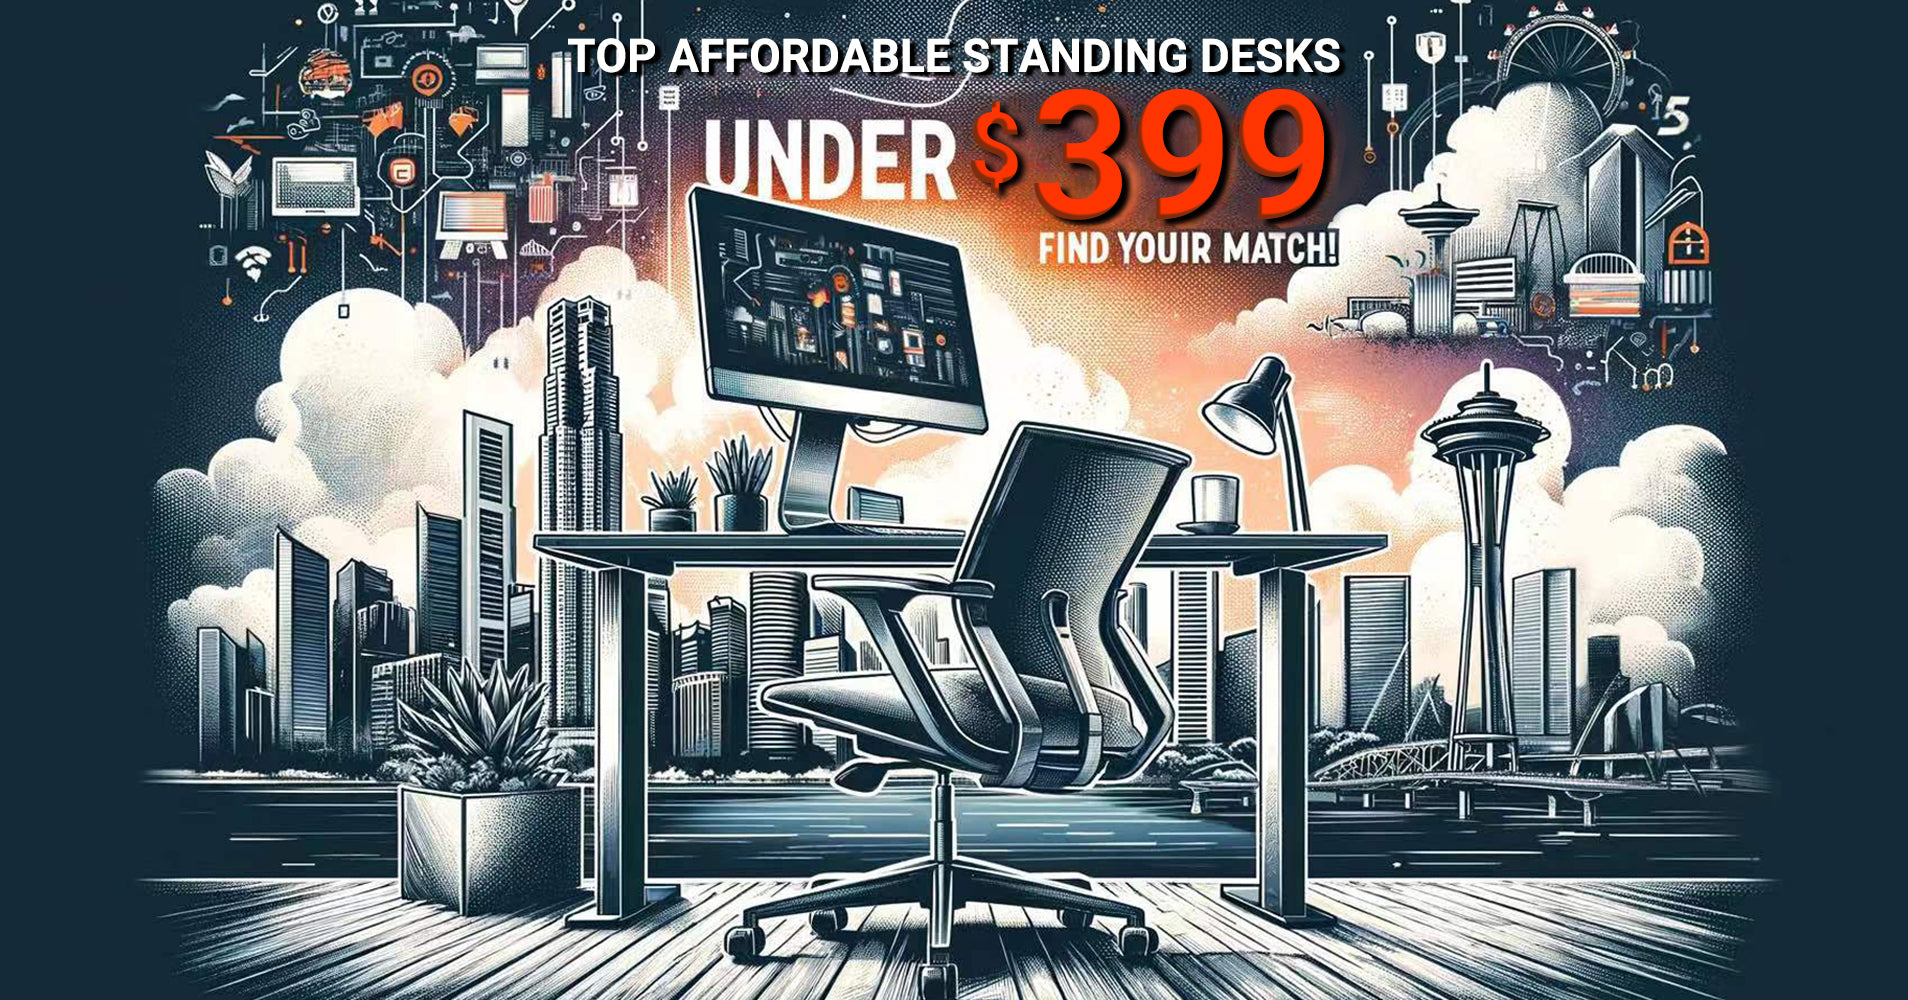 Artistic depiction of a modern standing desk setup with urban skyline and tech elements.